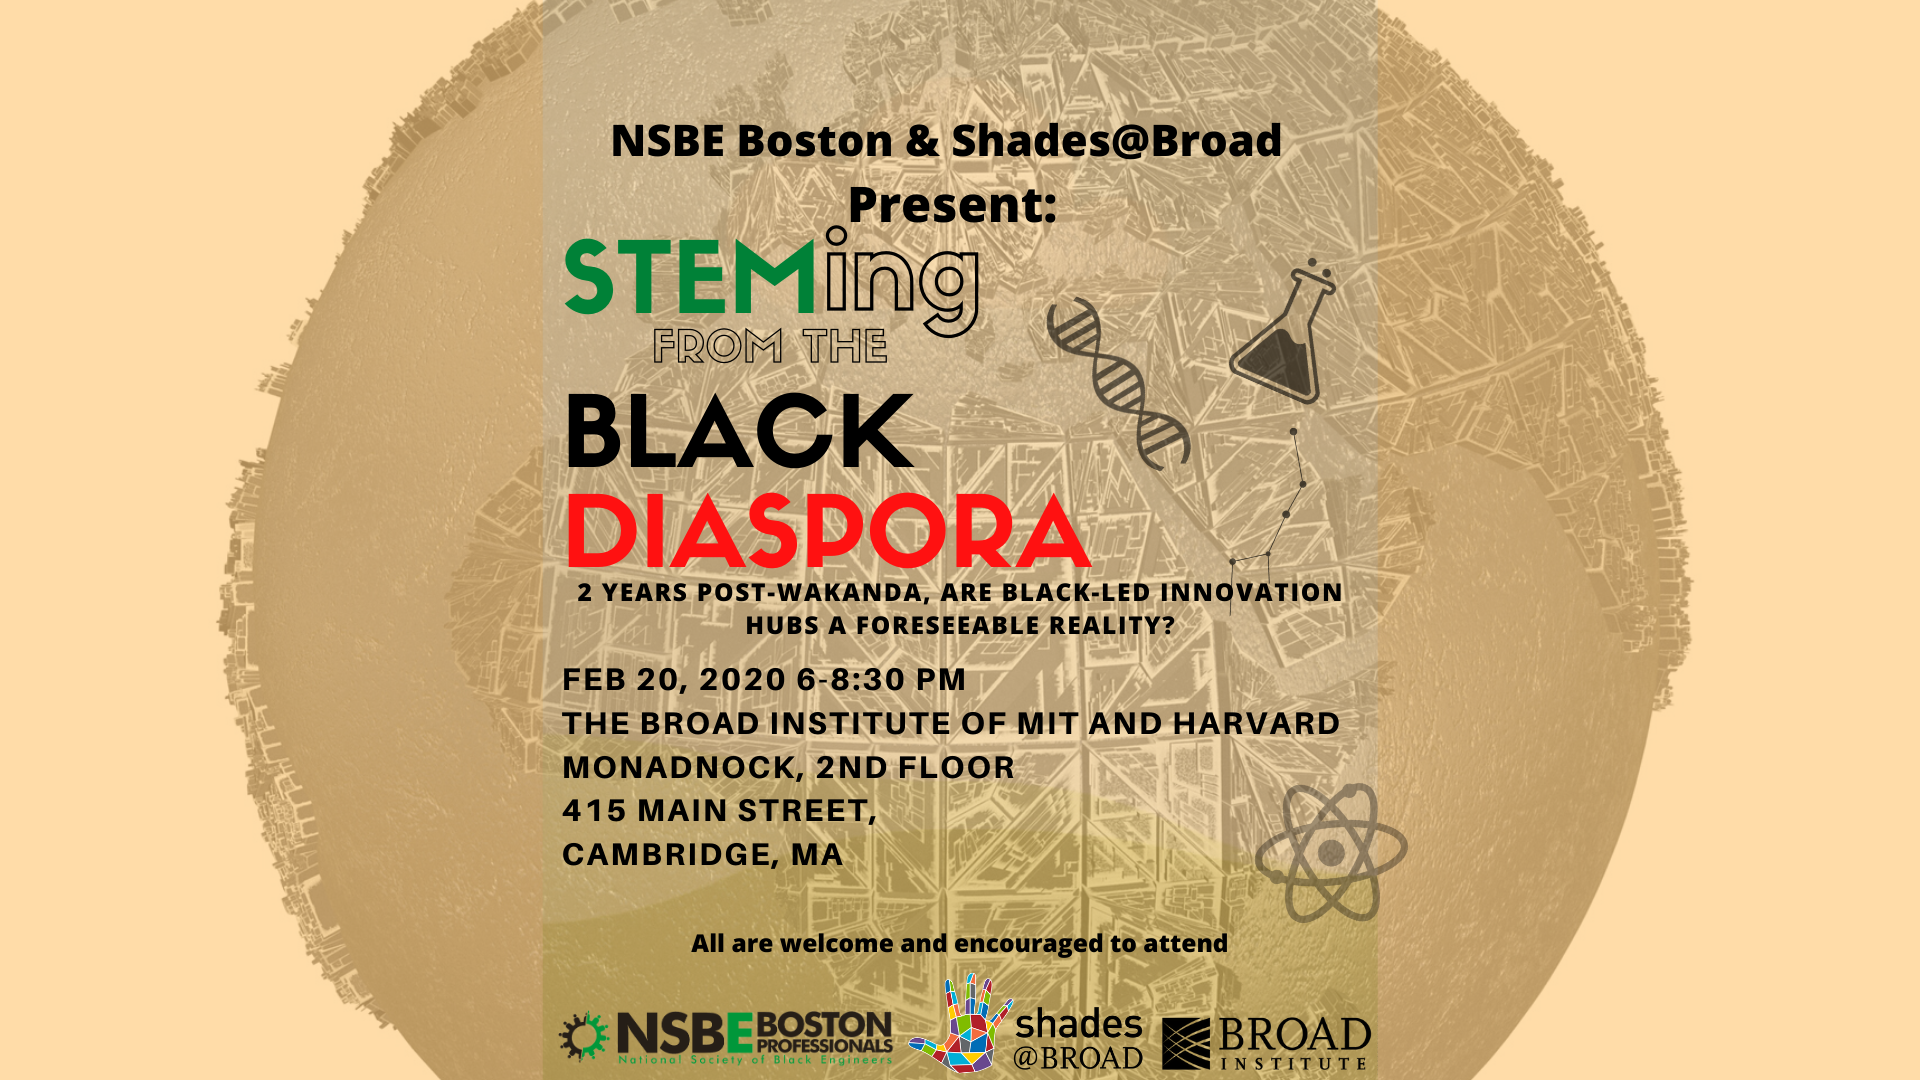 STEMing from the Black Diaspora: BHM event by NSBE Boston & Shades@Broad